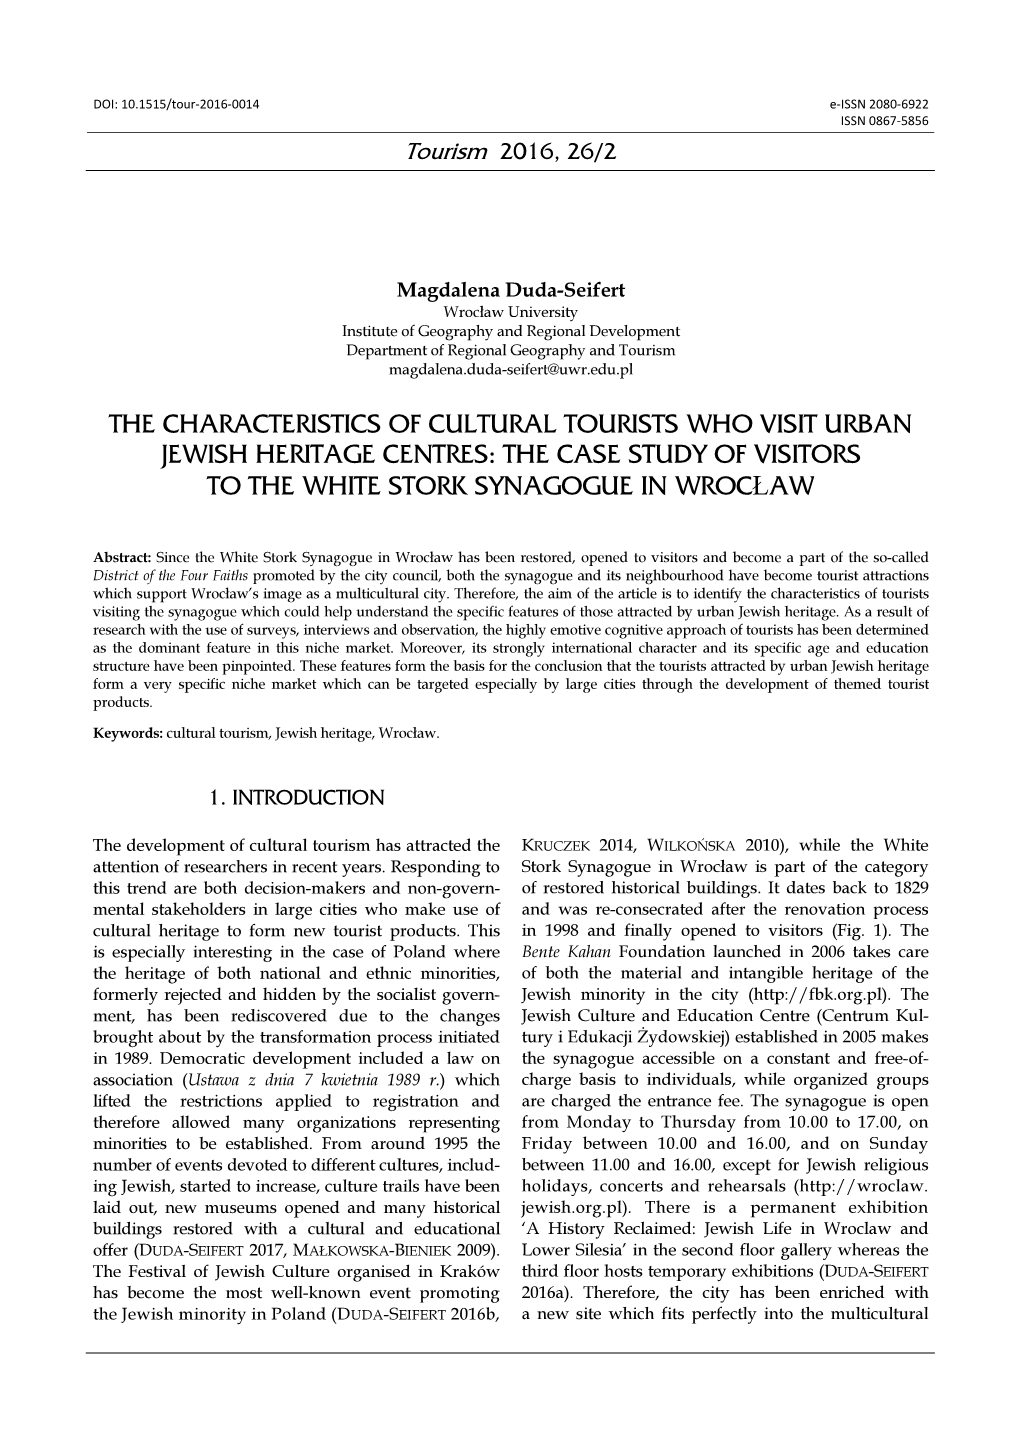 The Characteristics of Cultural Tourists Who Visit Urban Jewish Heritage Centres: the Case Study of Visitors to the White Stork Synagogue in Wroc Ław